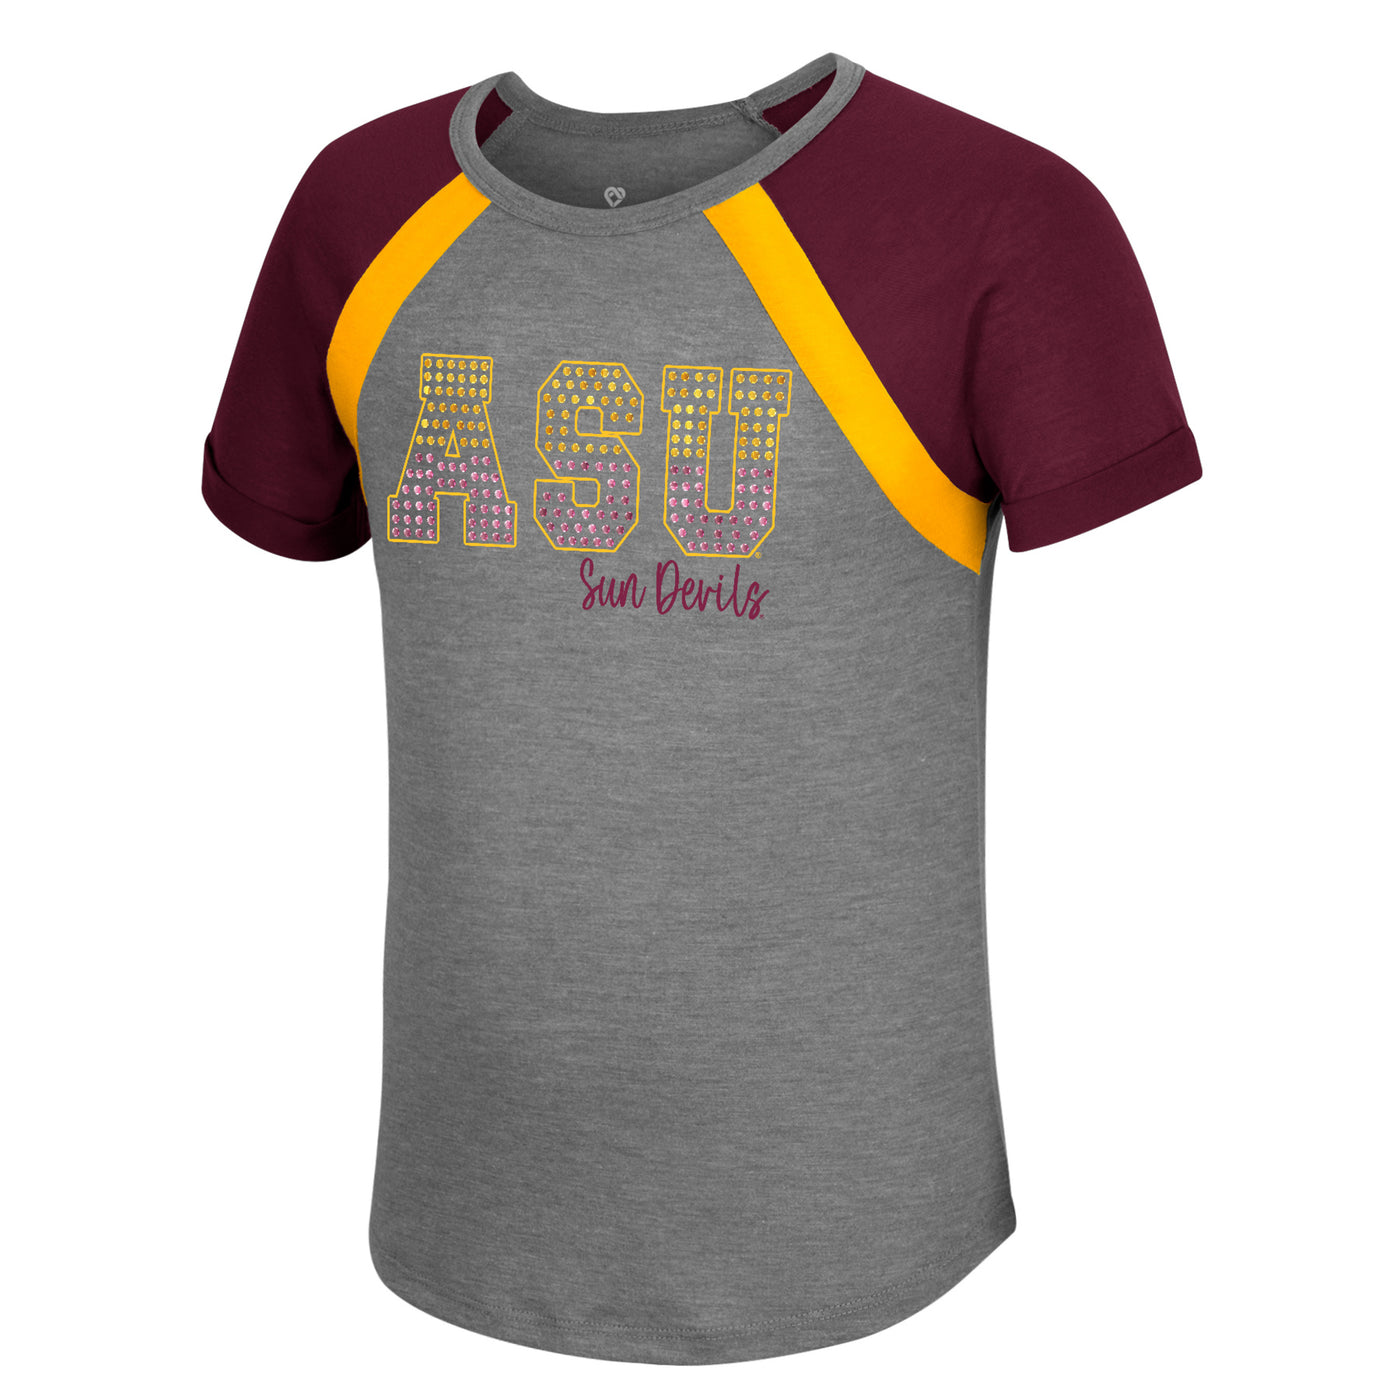 ASU grey shirt with gold stripe accents along the sleeve seem. The sleeves are maroon and folded over. On the chest of the shirt is 